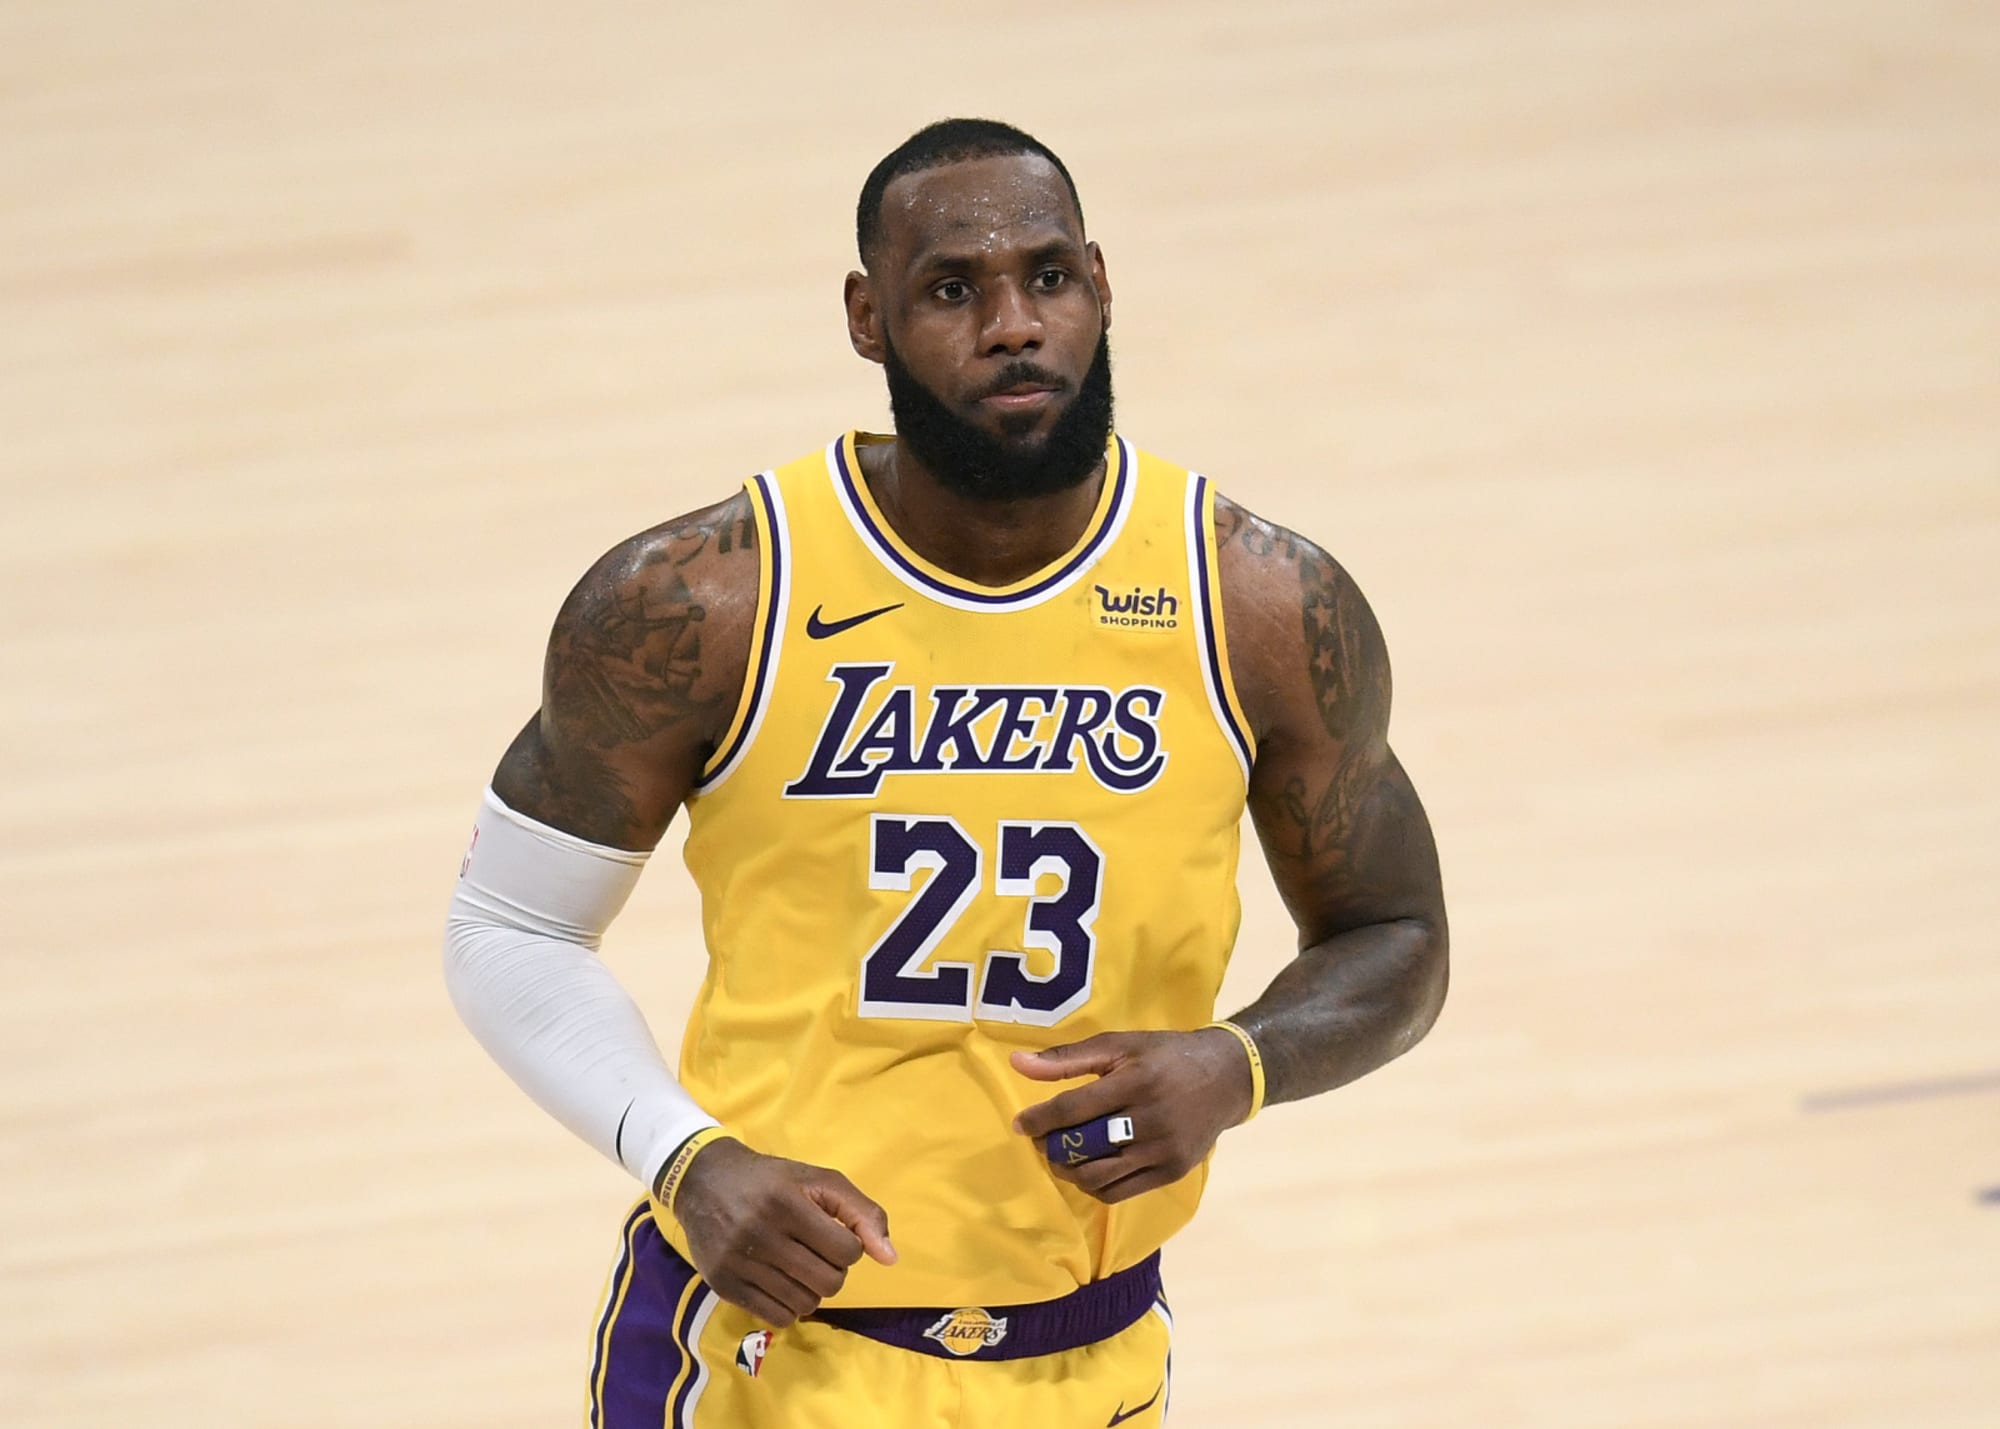 LeBron James is the MVP of the NBA and it is not close